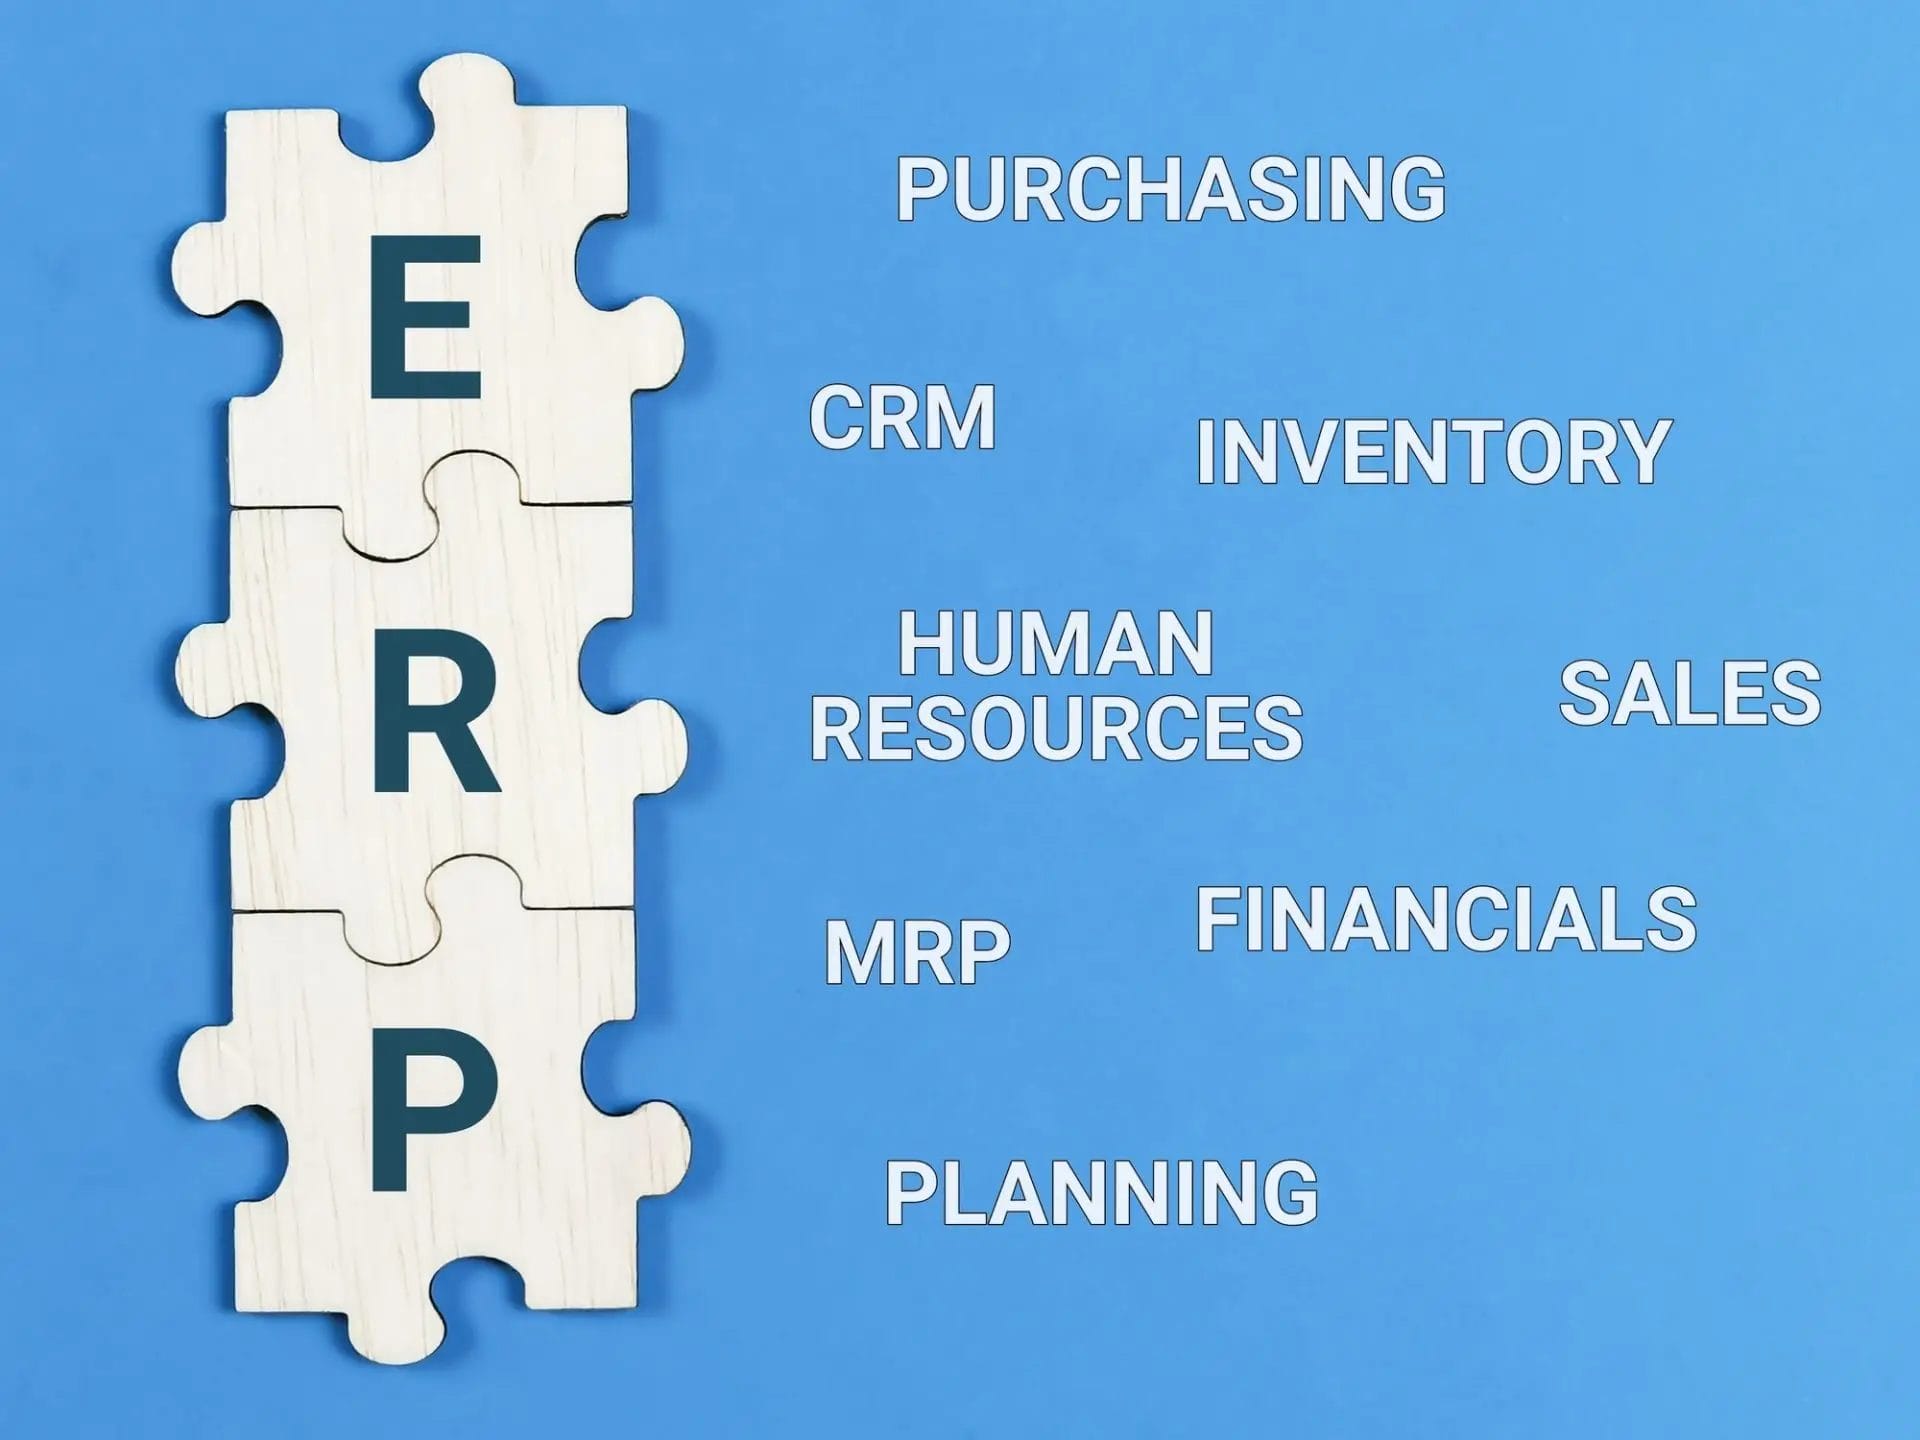 Enterprise Resource Planning concept. Text ERP with jigsaw puzzle pieces on blue background.